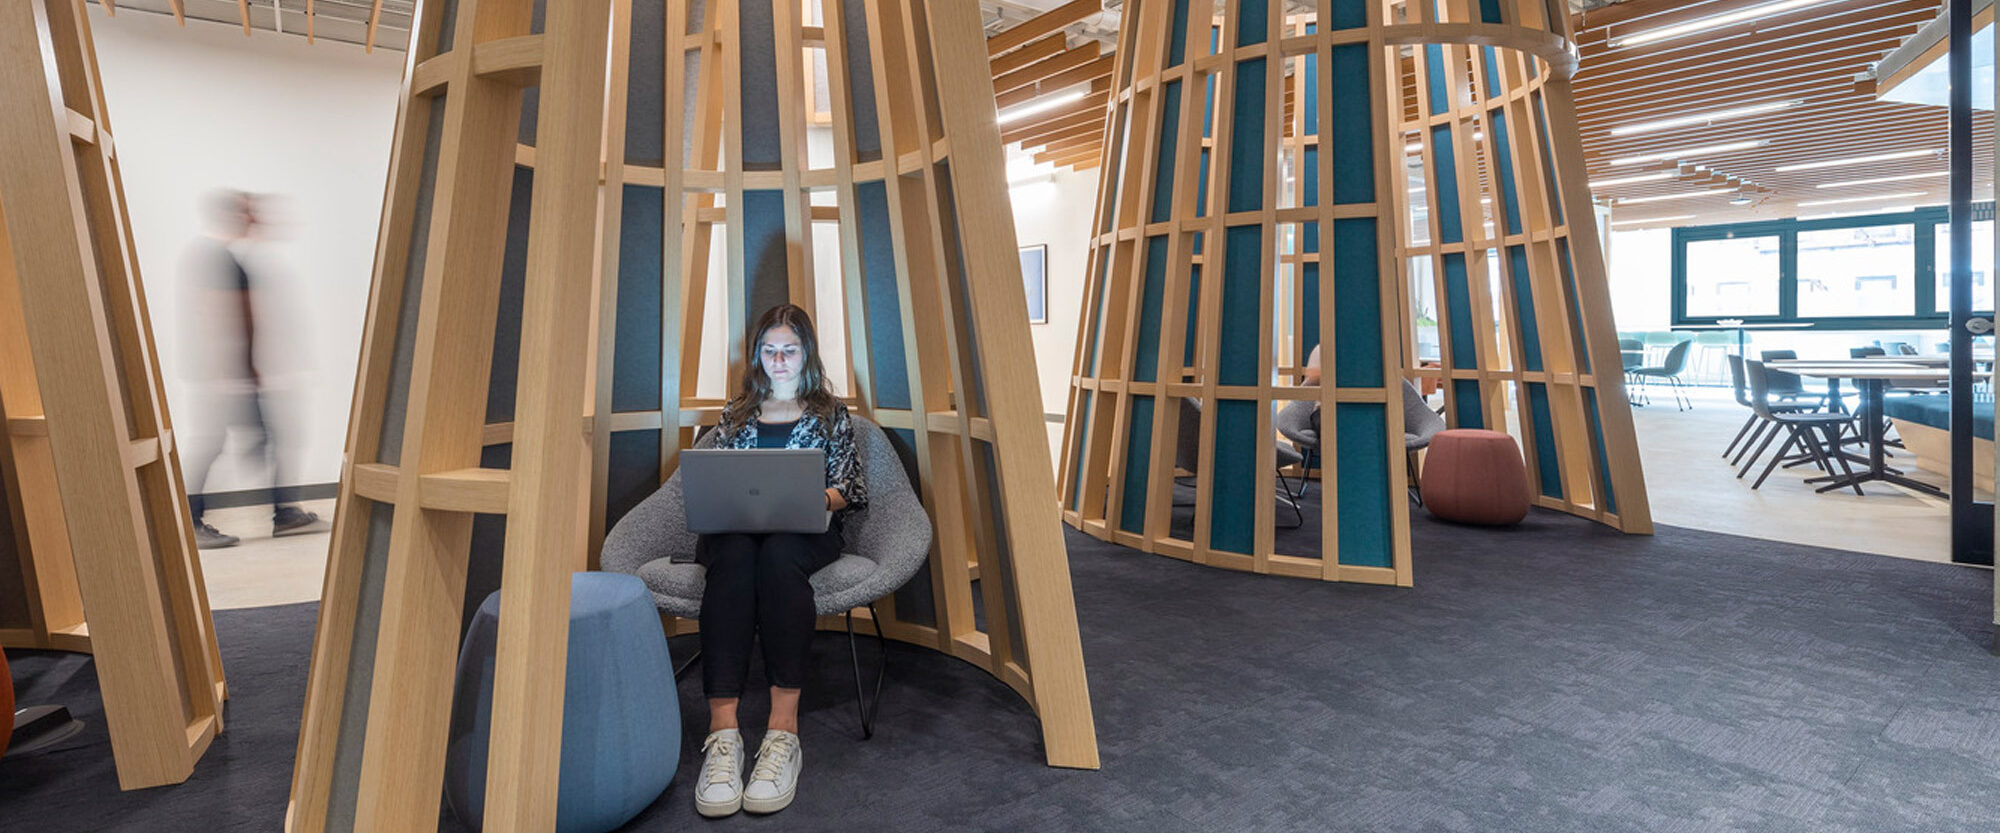 Modern office interior featuring distinctive wooden, tree-like structures creating semi-private seating areas. A person works on a laptop, seated on a blue pouf, amidst these organic design elements, which harmonize with the industrial-chic open-plan workspace.